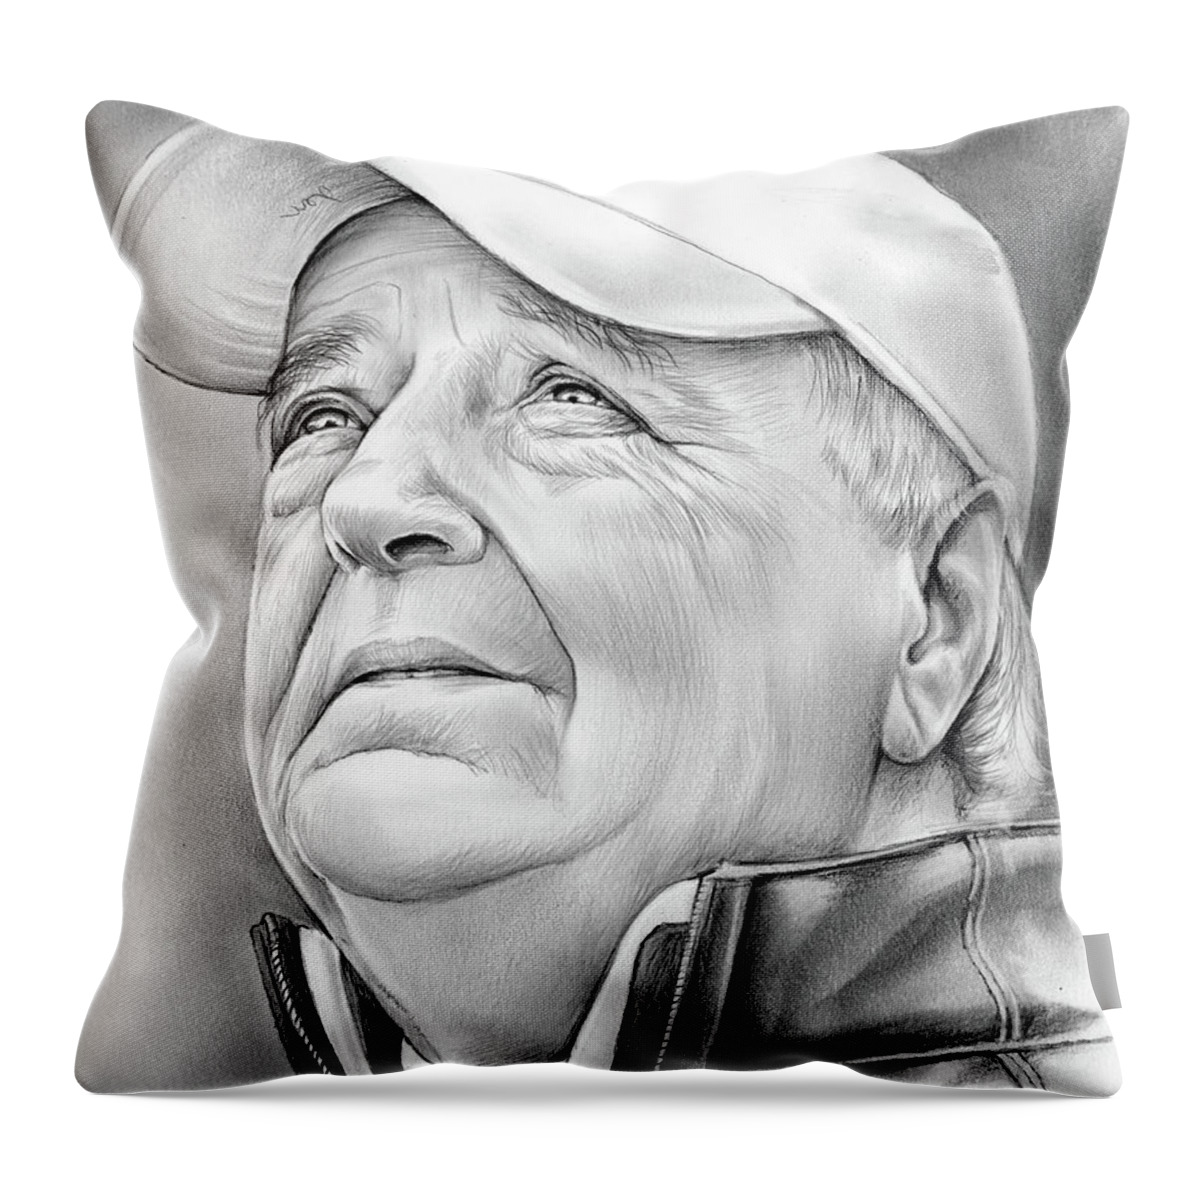 Bobby Bowden Throw Pillow featuring the drawing Bobby Bowden by Greg Joens